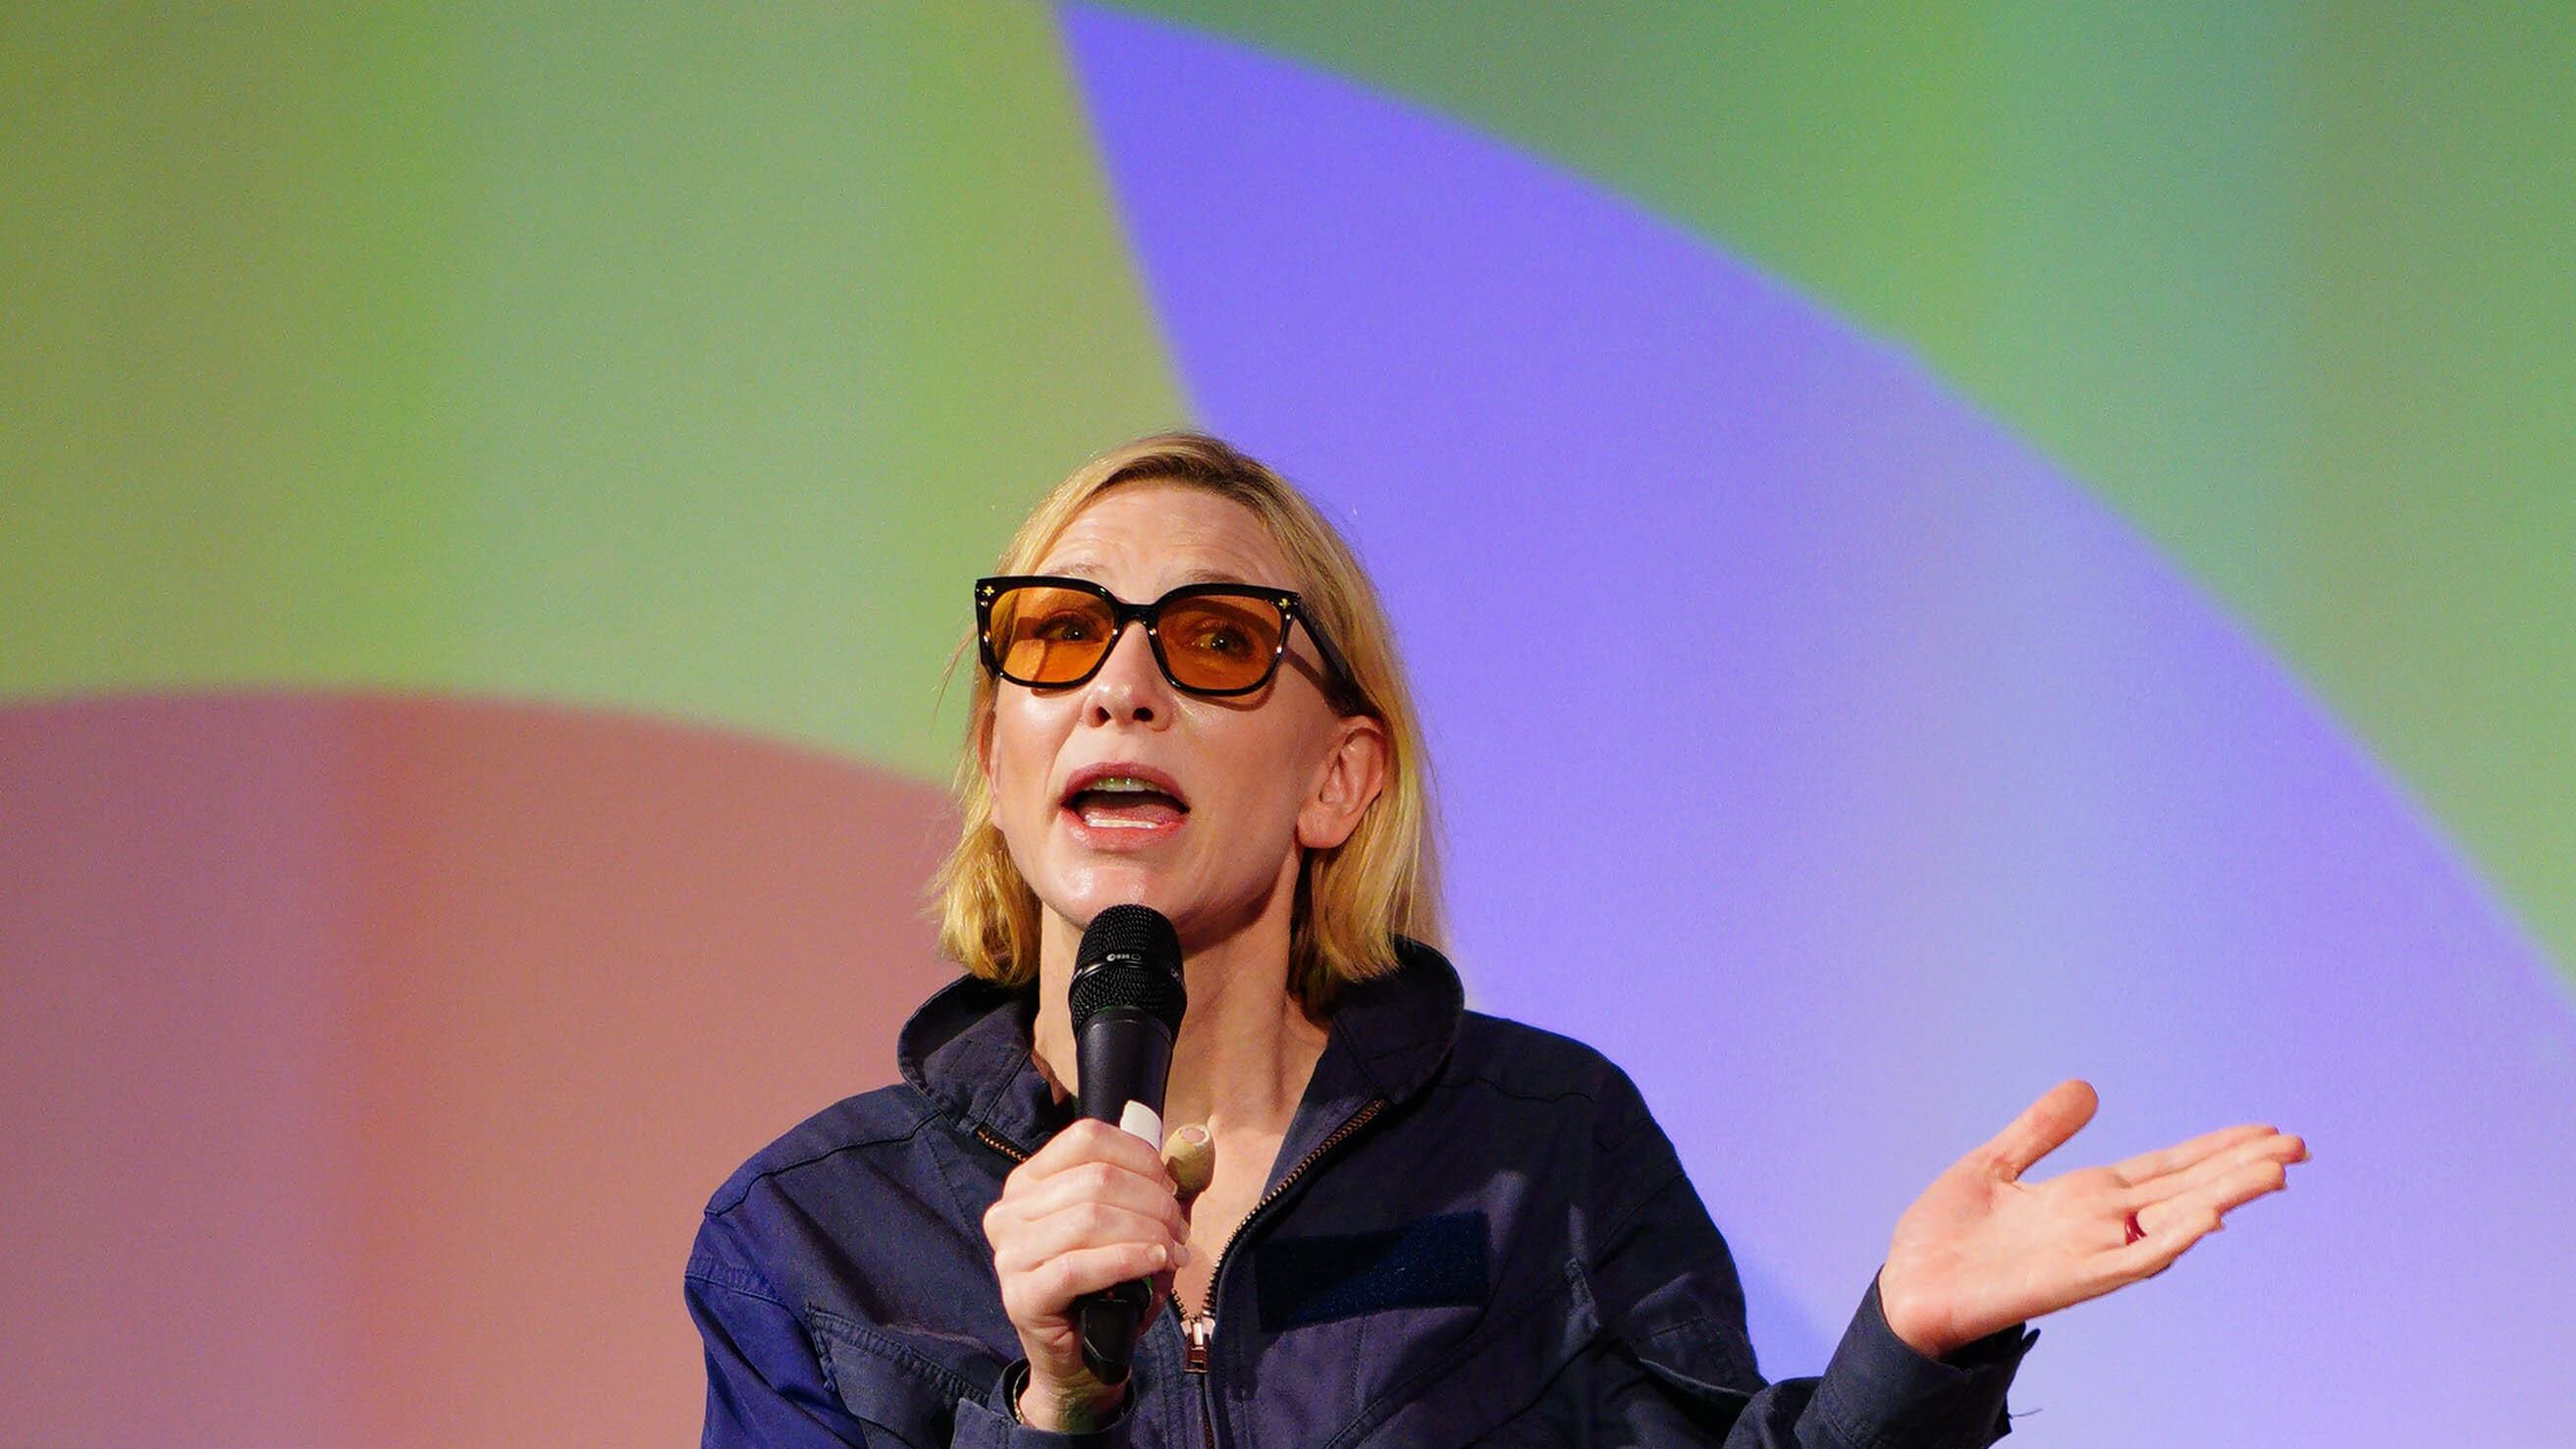 The actress was taking questions from an audience at Glastonbury Festival